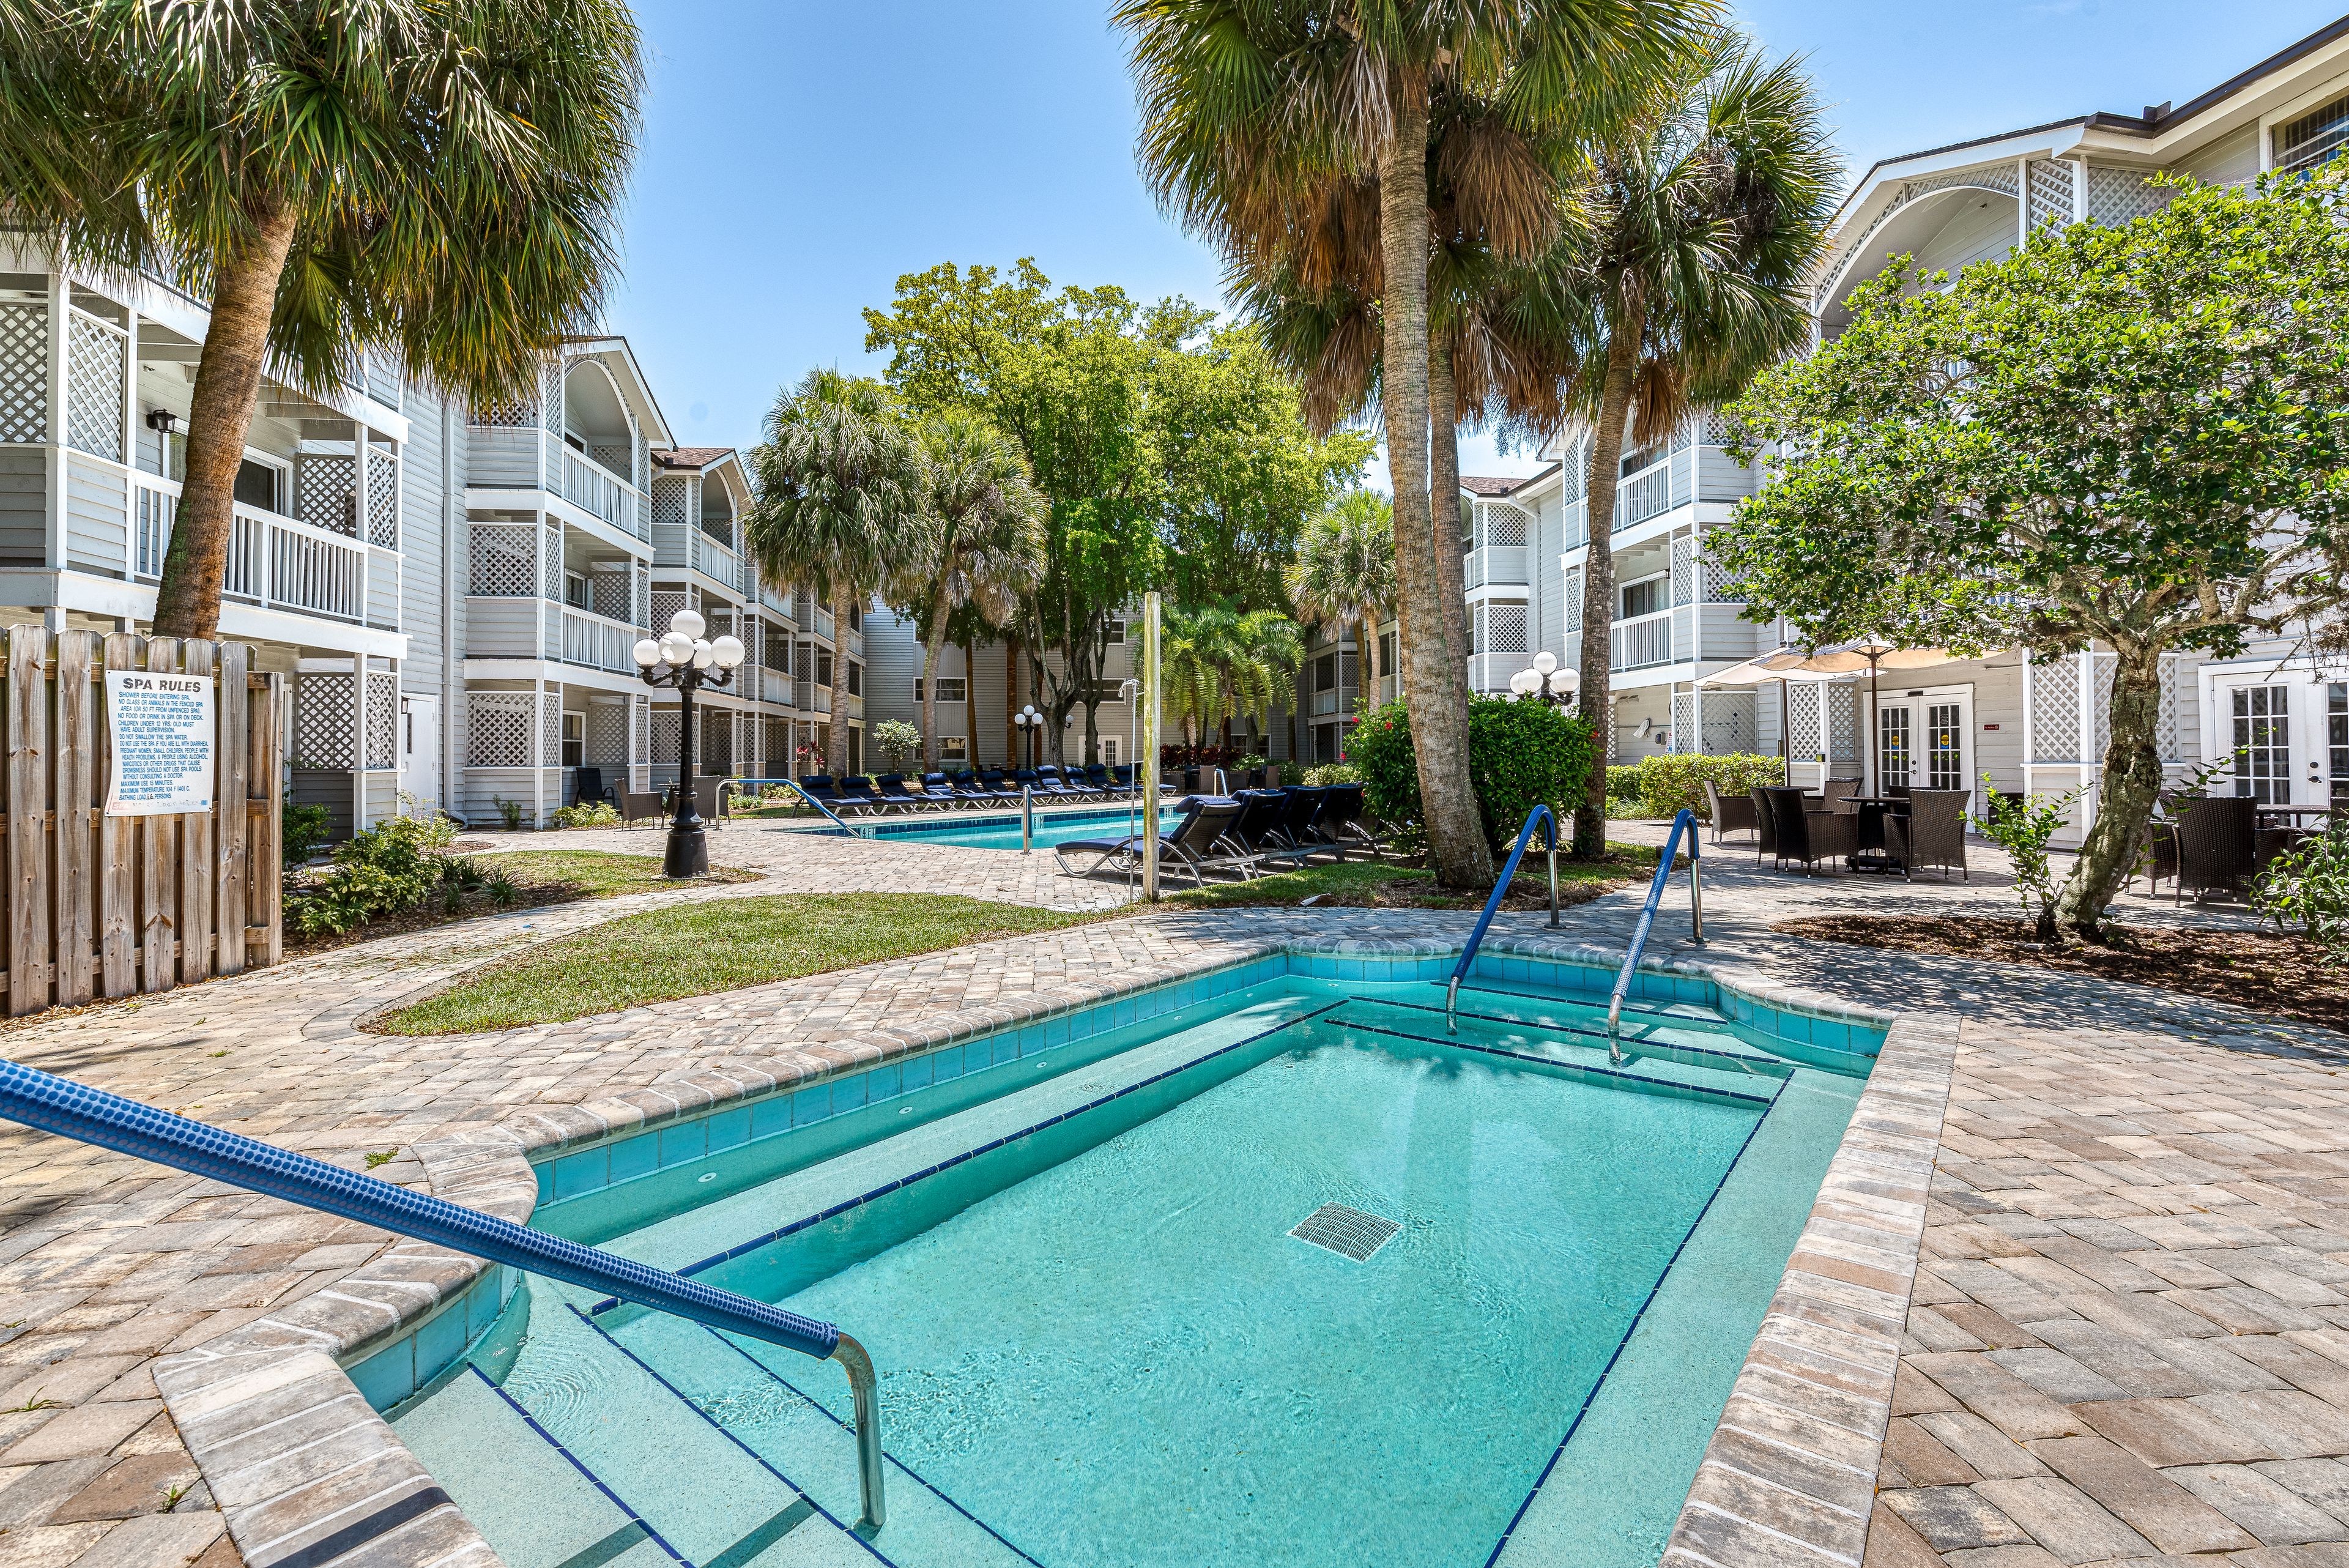 Summer view of The Meridian At Lantana senior living community with pool and lush scenery.